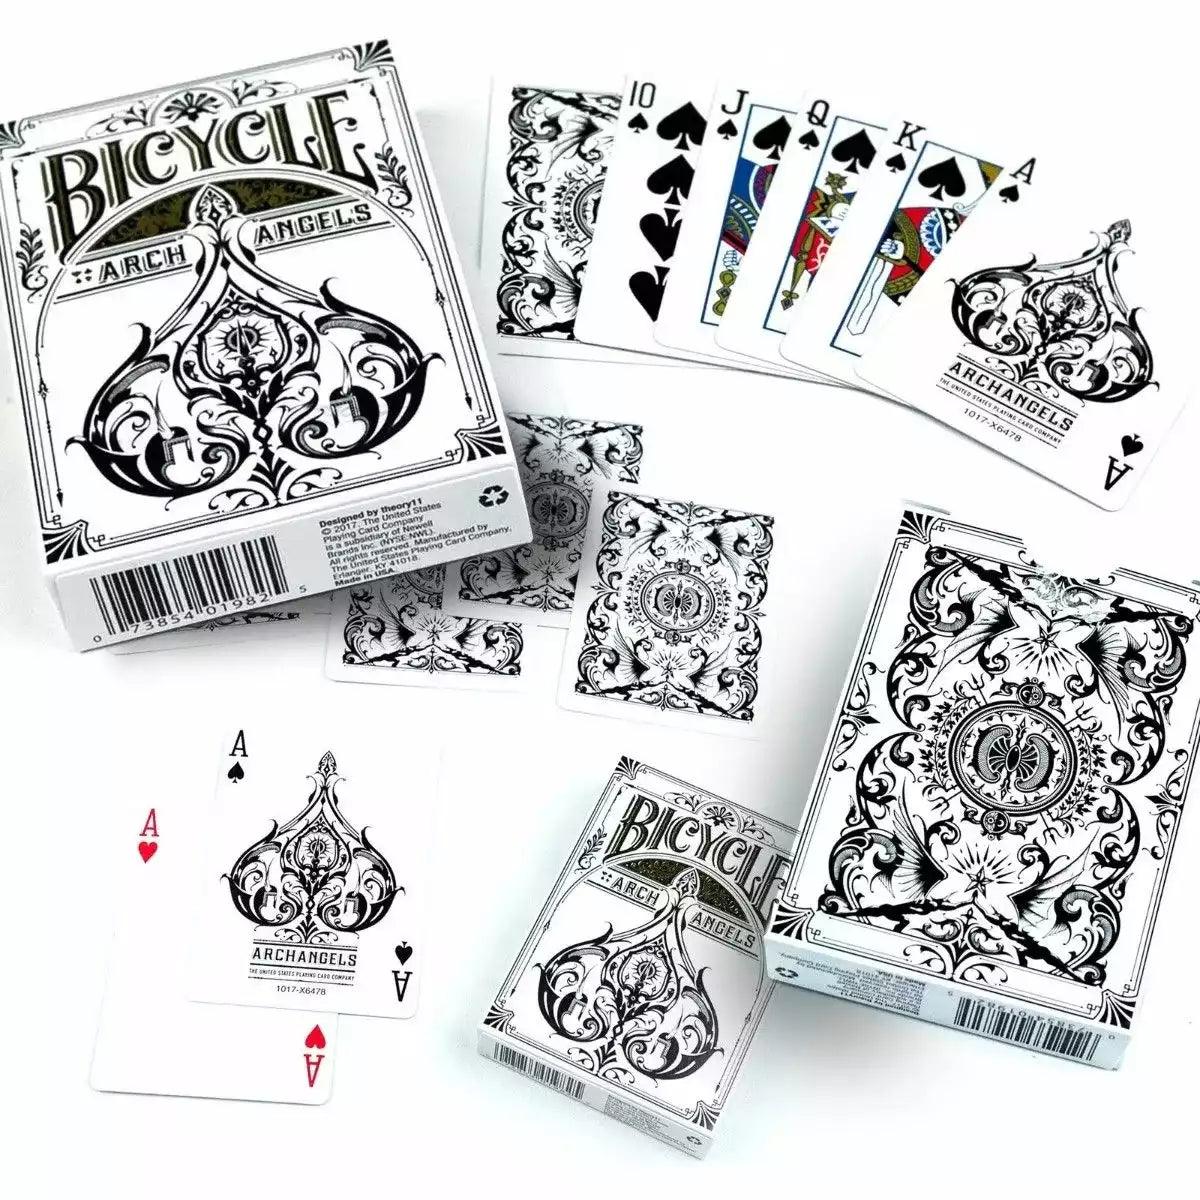 Bicycle Archangels Playing Cards - Eclipse Games Puzzles Novelties